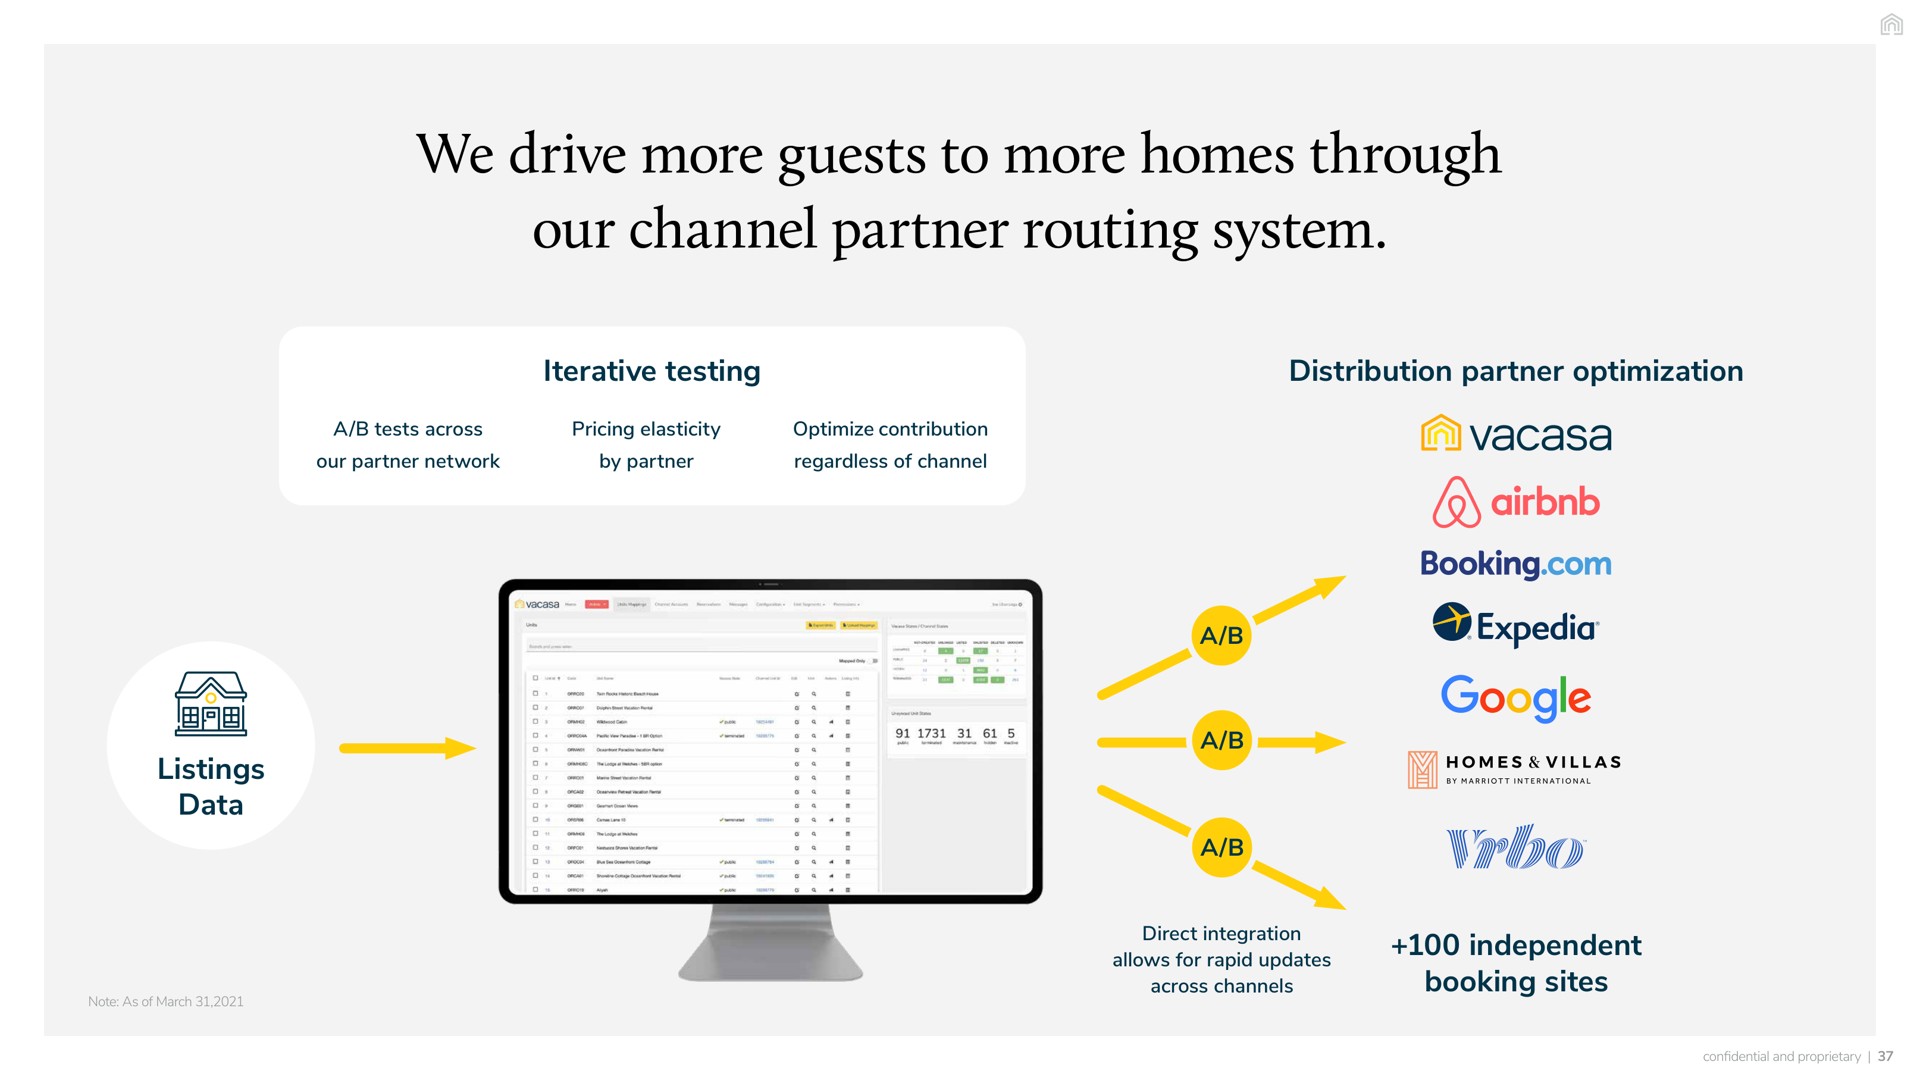 we drive more guests to more homes through our channel partner routing system iterative testing distribution optimization fas listings data a tests across network a by pricing elasticity regardless of optimize contribution booking booking sites allows for rapid updates across channels a a direct villas by international independent | Vacasa